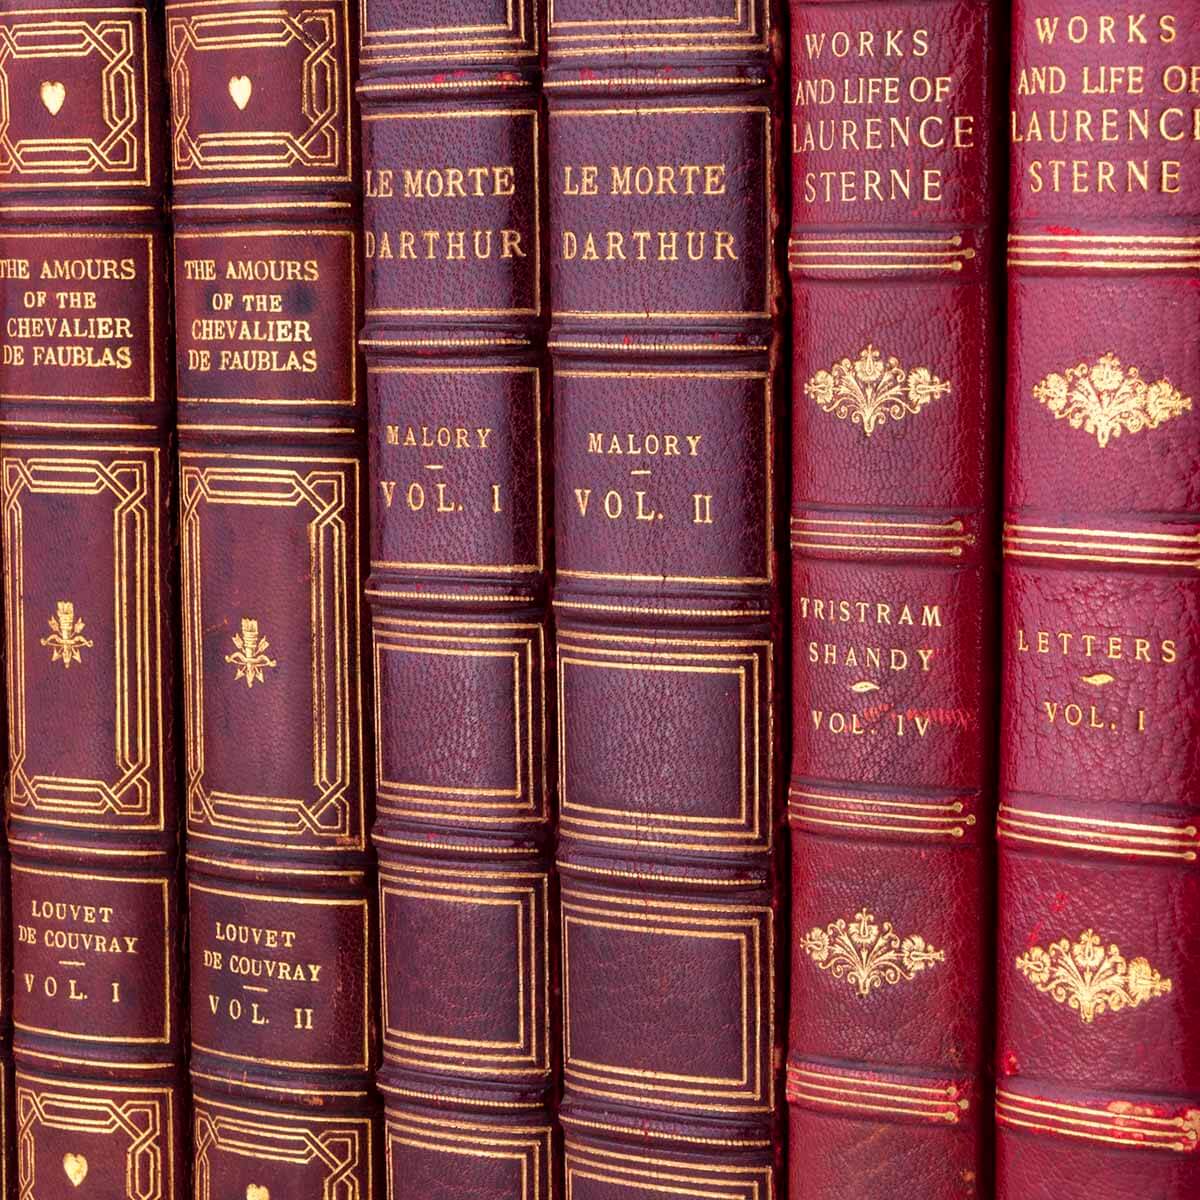 Close Up Of Antique Books In Leather #1 Poster by Tetra Images 